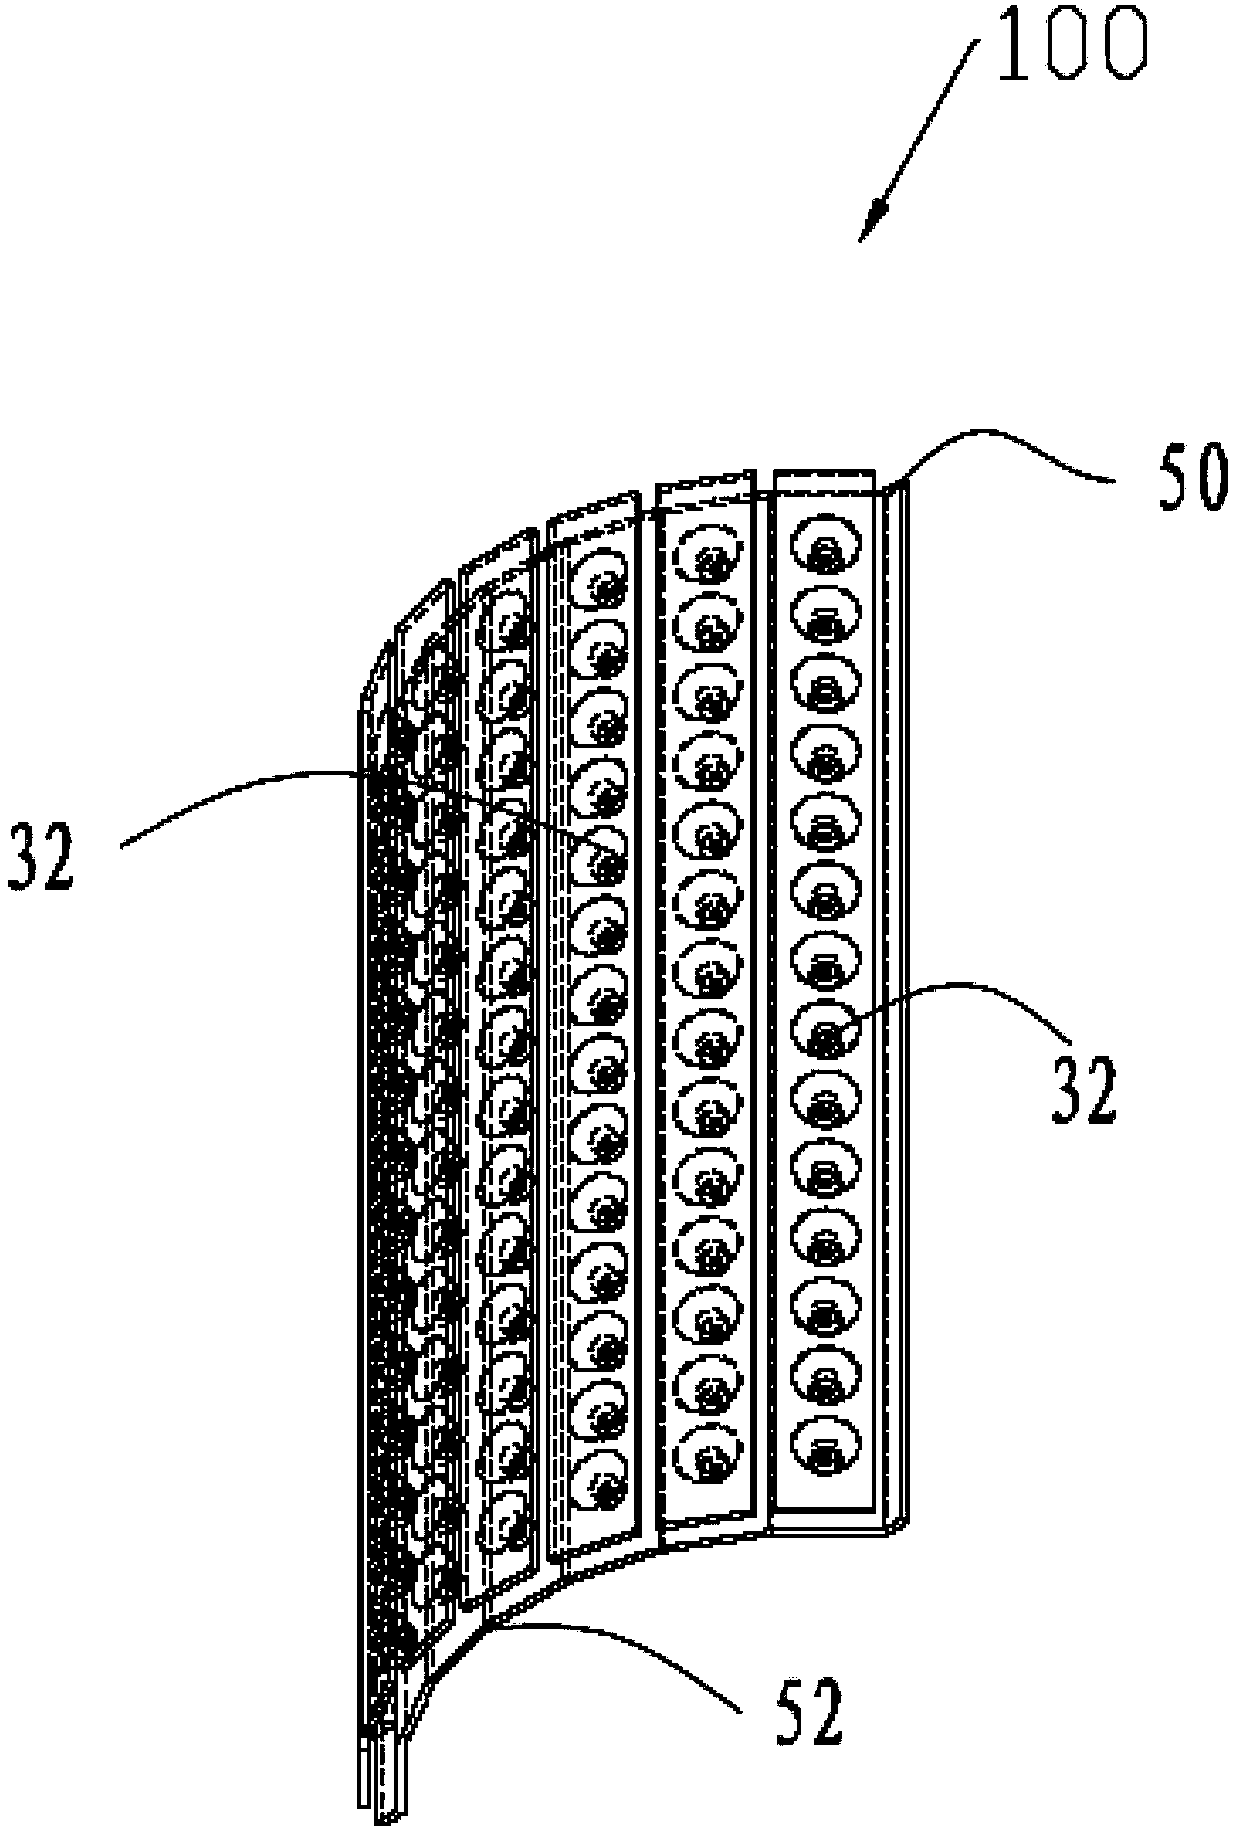 Trimming structure and LED (light emitting diode) lamp adopting trimming structure